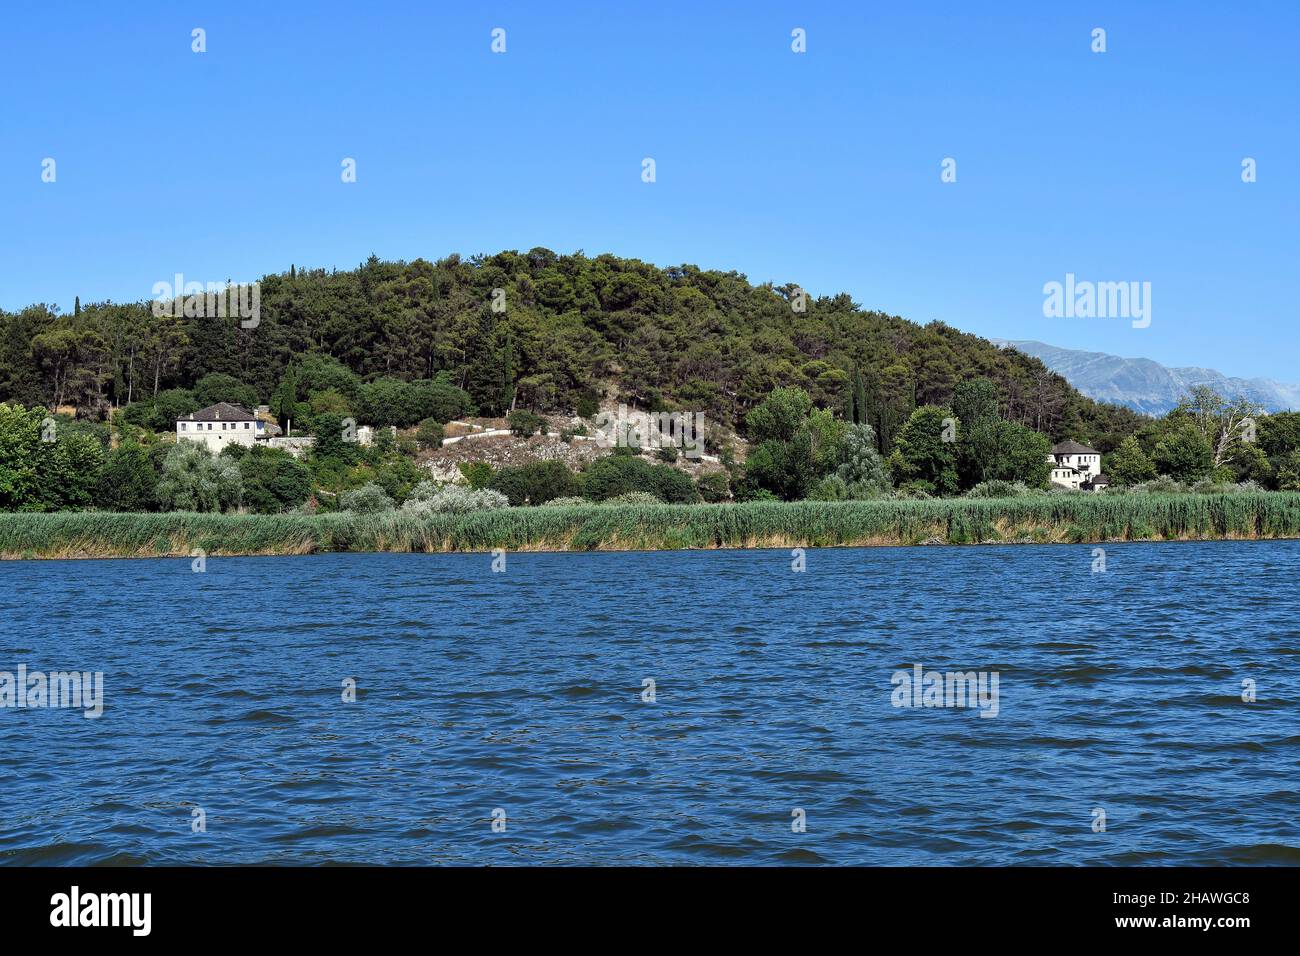 Greece, Ioannina, view to the tiny island in lake Pamvotida with old monasteries Stock Photo